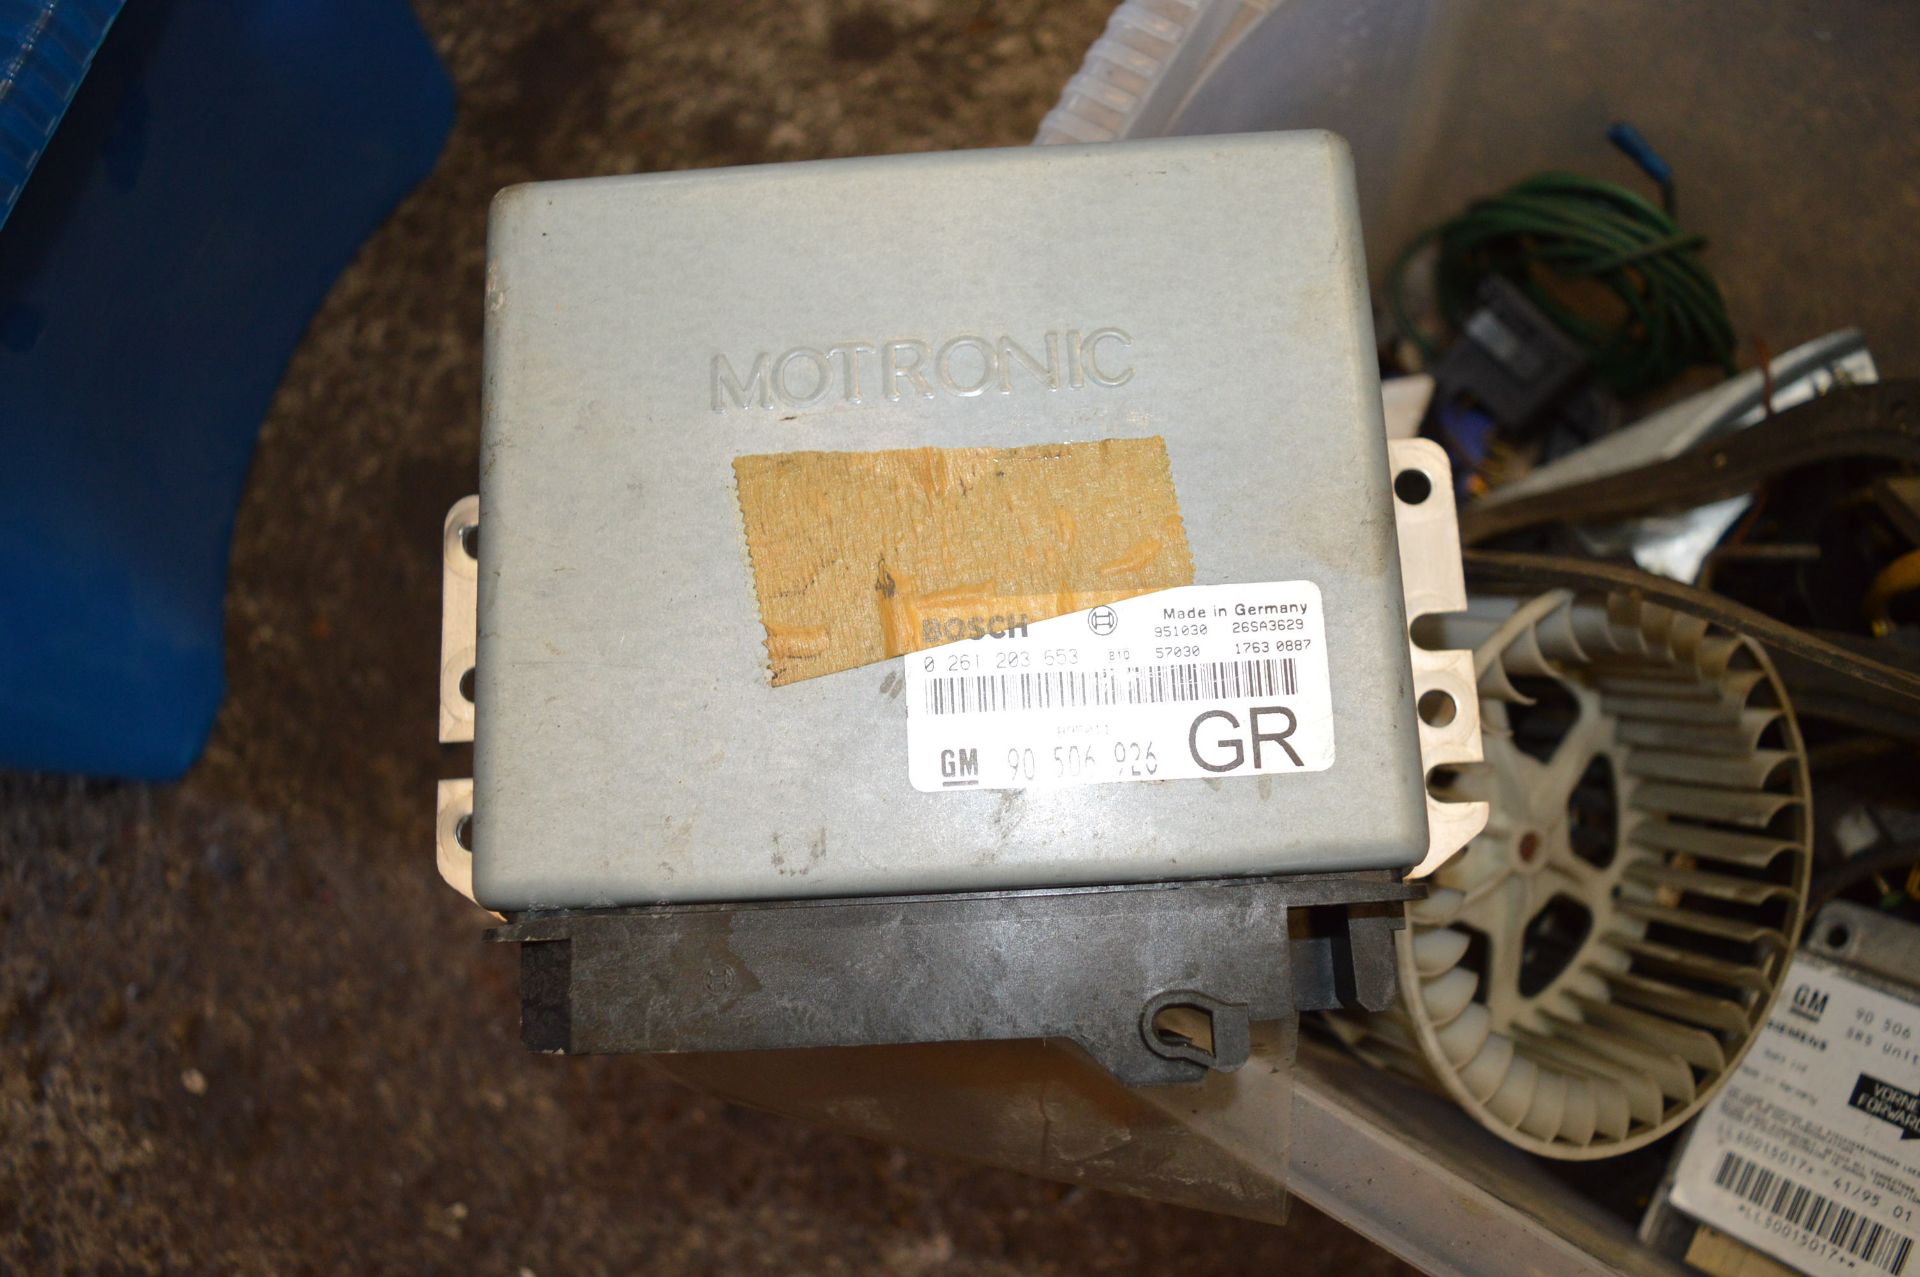 Box Containing Heater Motor, Switches, and an ACU - Image 2 of 4